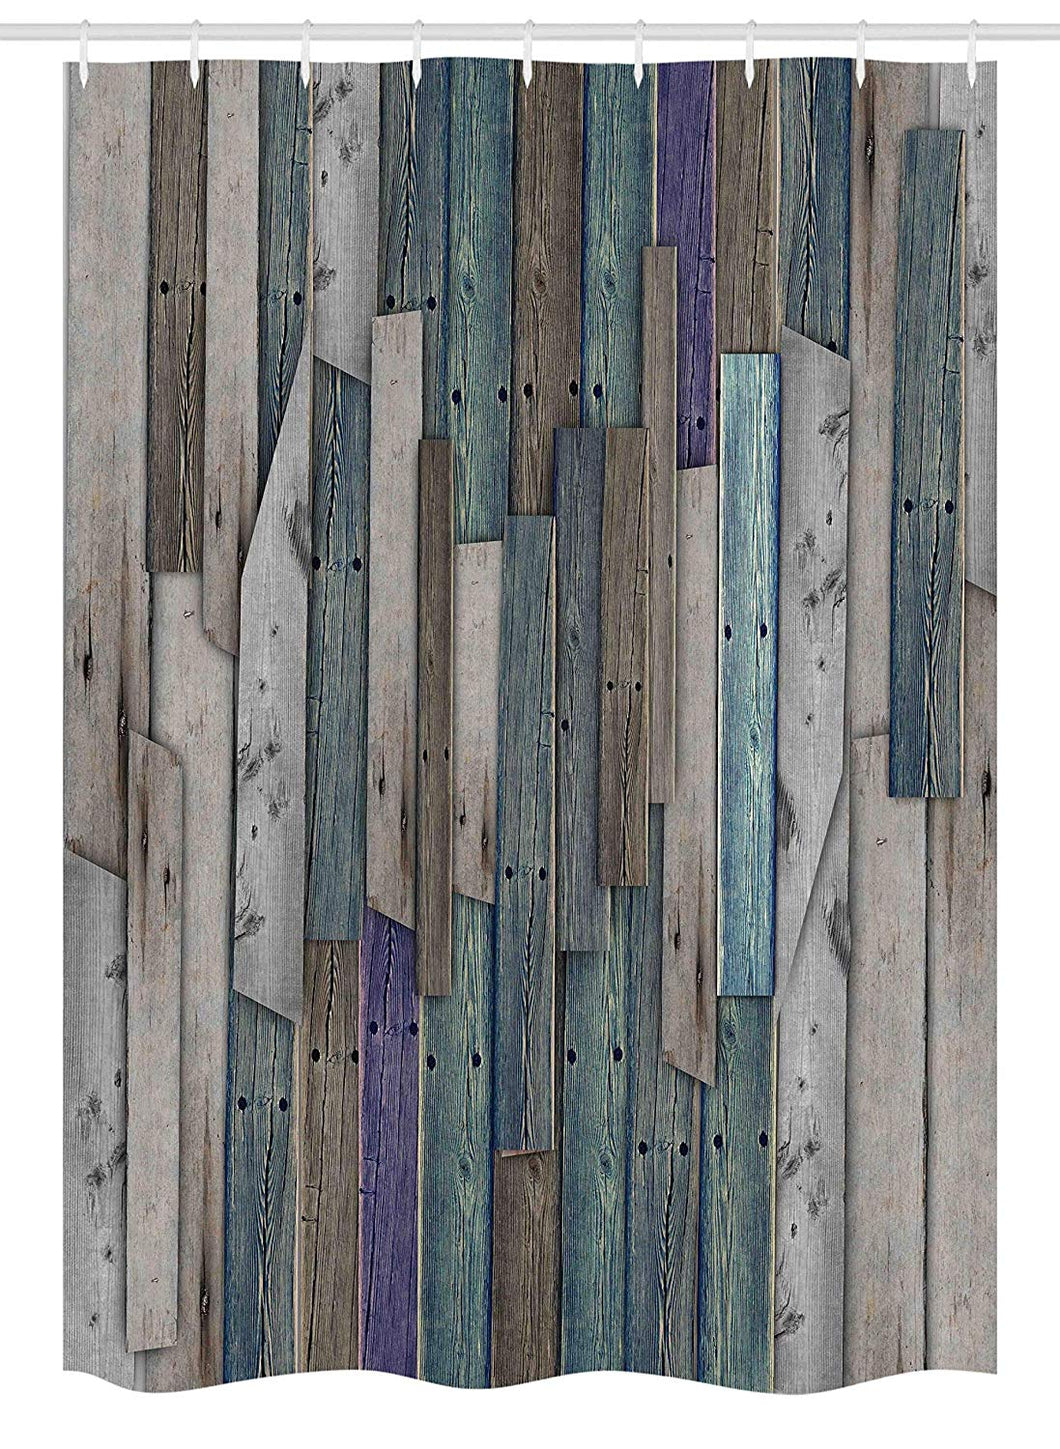 Ambesonne Rustic Stall Shower Curtain, Image of Blue Grey Grunge Wood Planks Barn House Door Nails Country Life Theme Print, Fabric Bathroom Decor Set with Hooks, 54